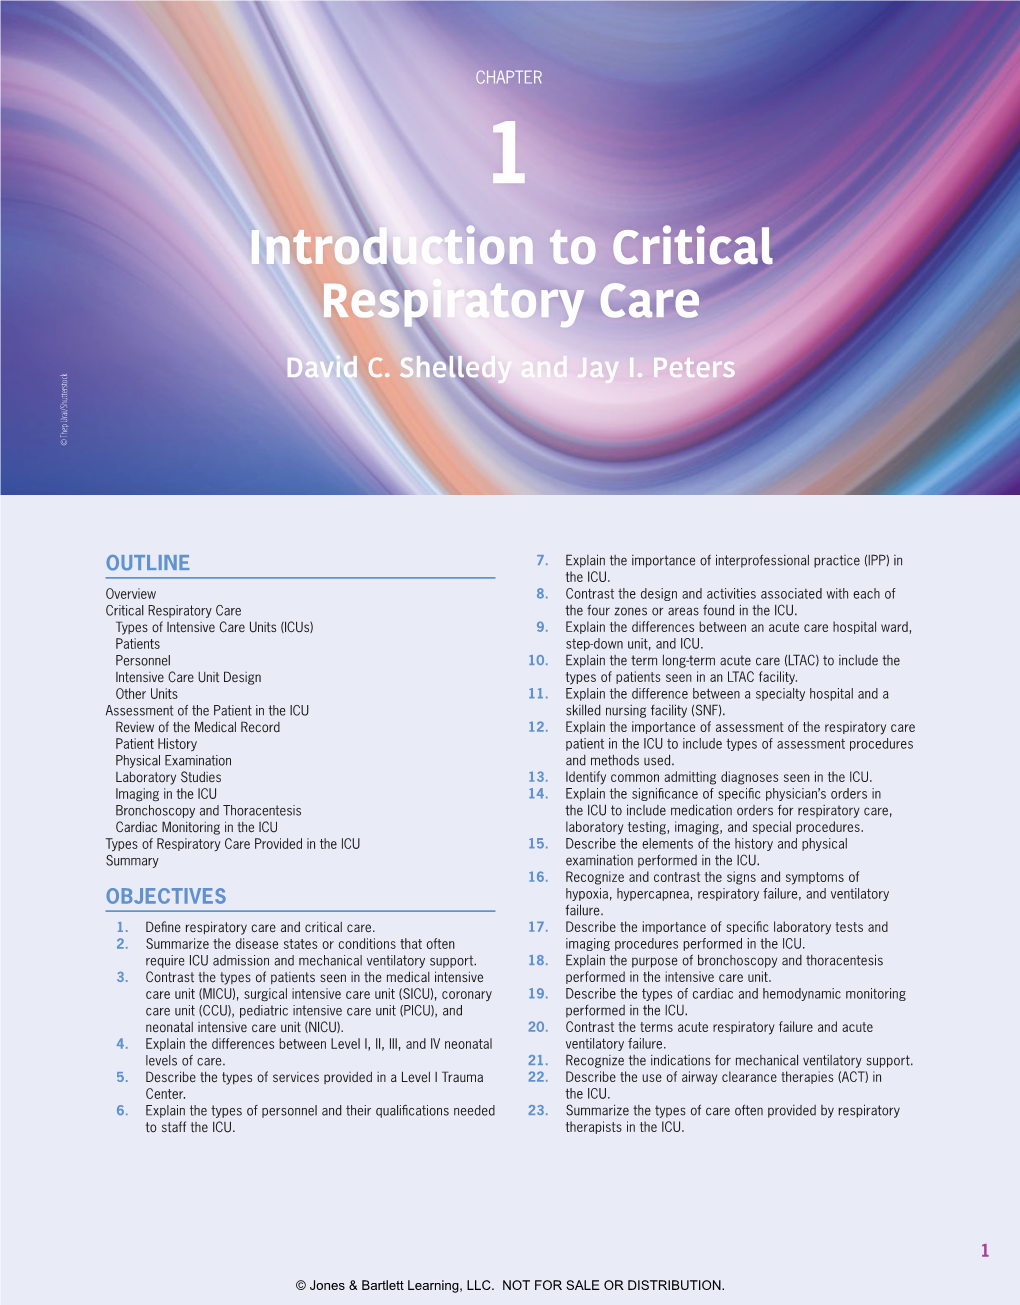 CHAPTER 1 Introduction to Critical Respiratory Care